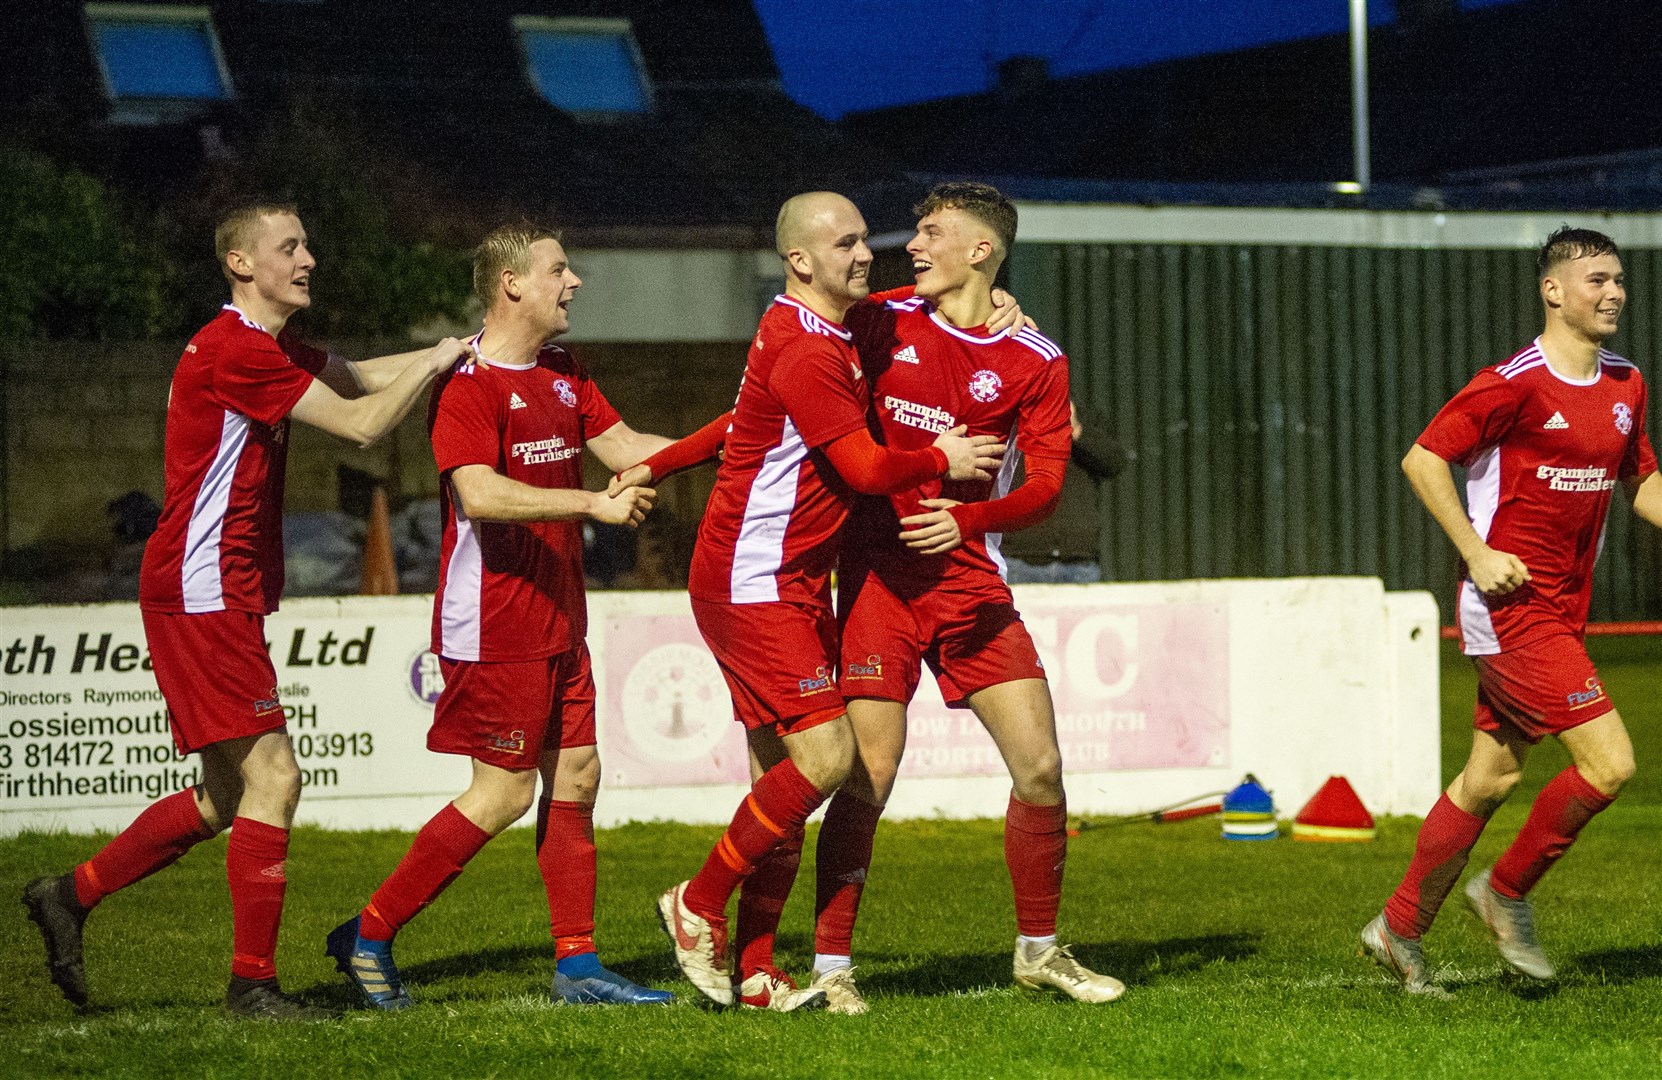 Celebration time for the Lossiemouth team. Picture: Daniel Forsyth..